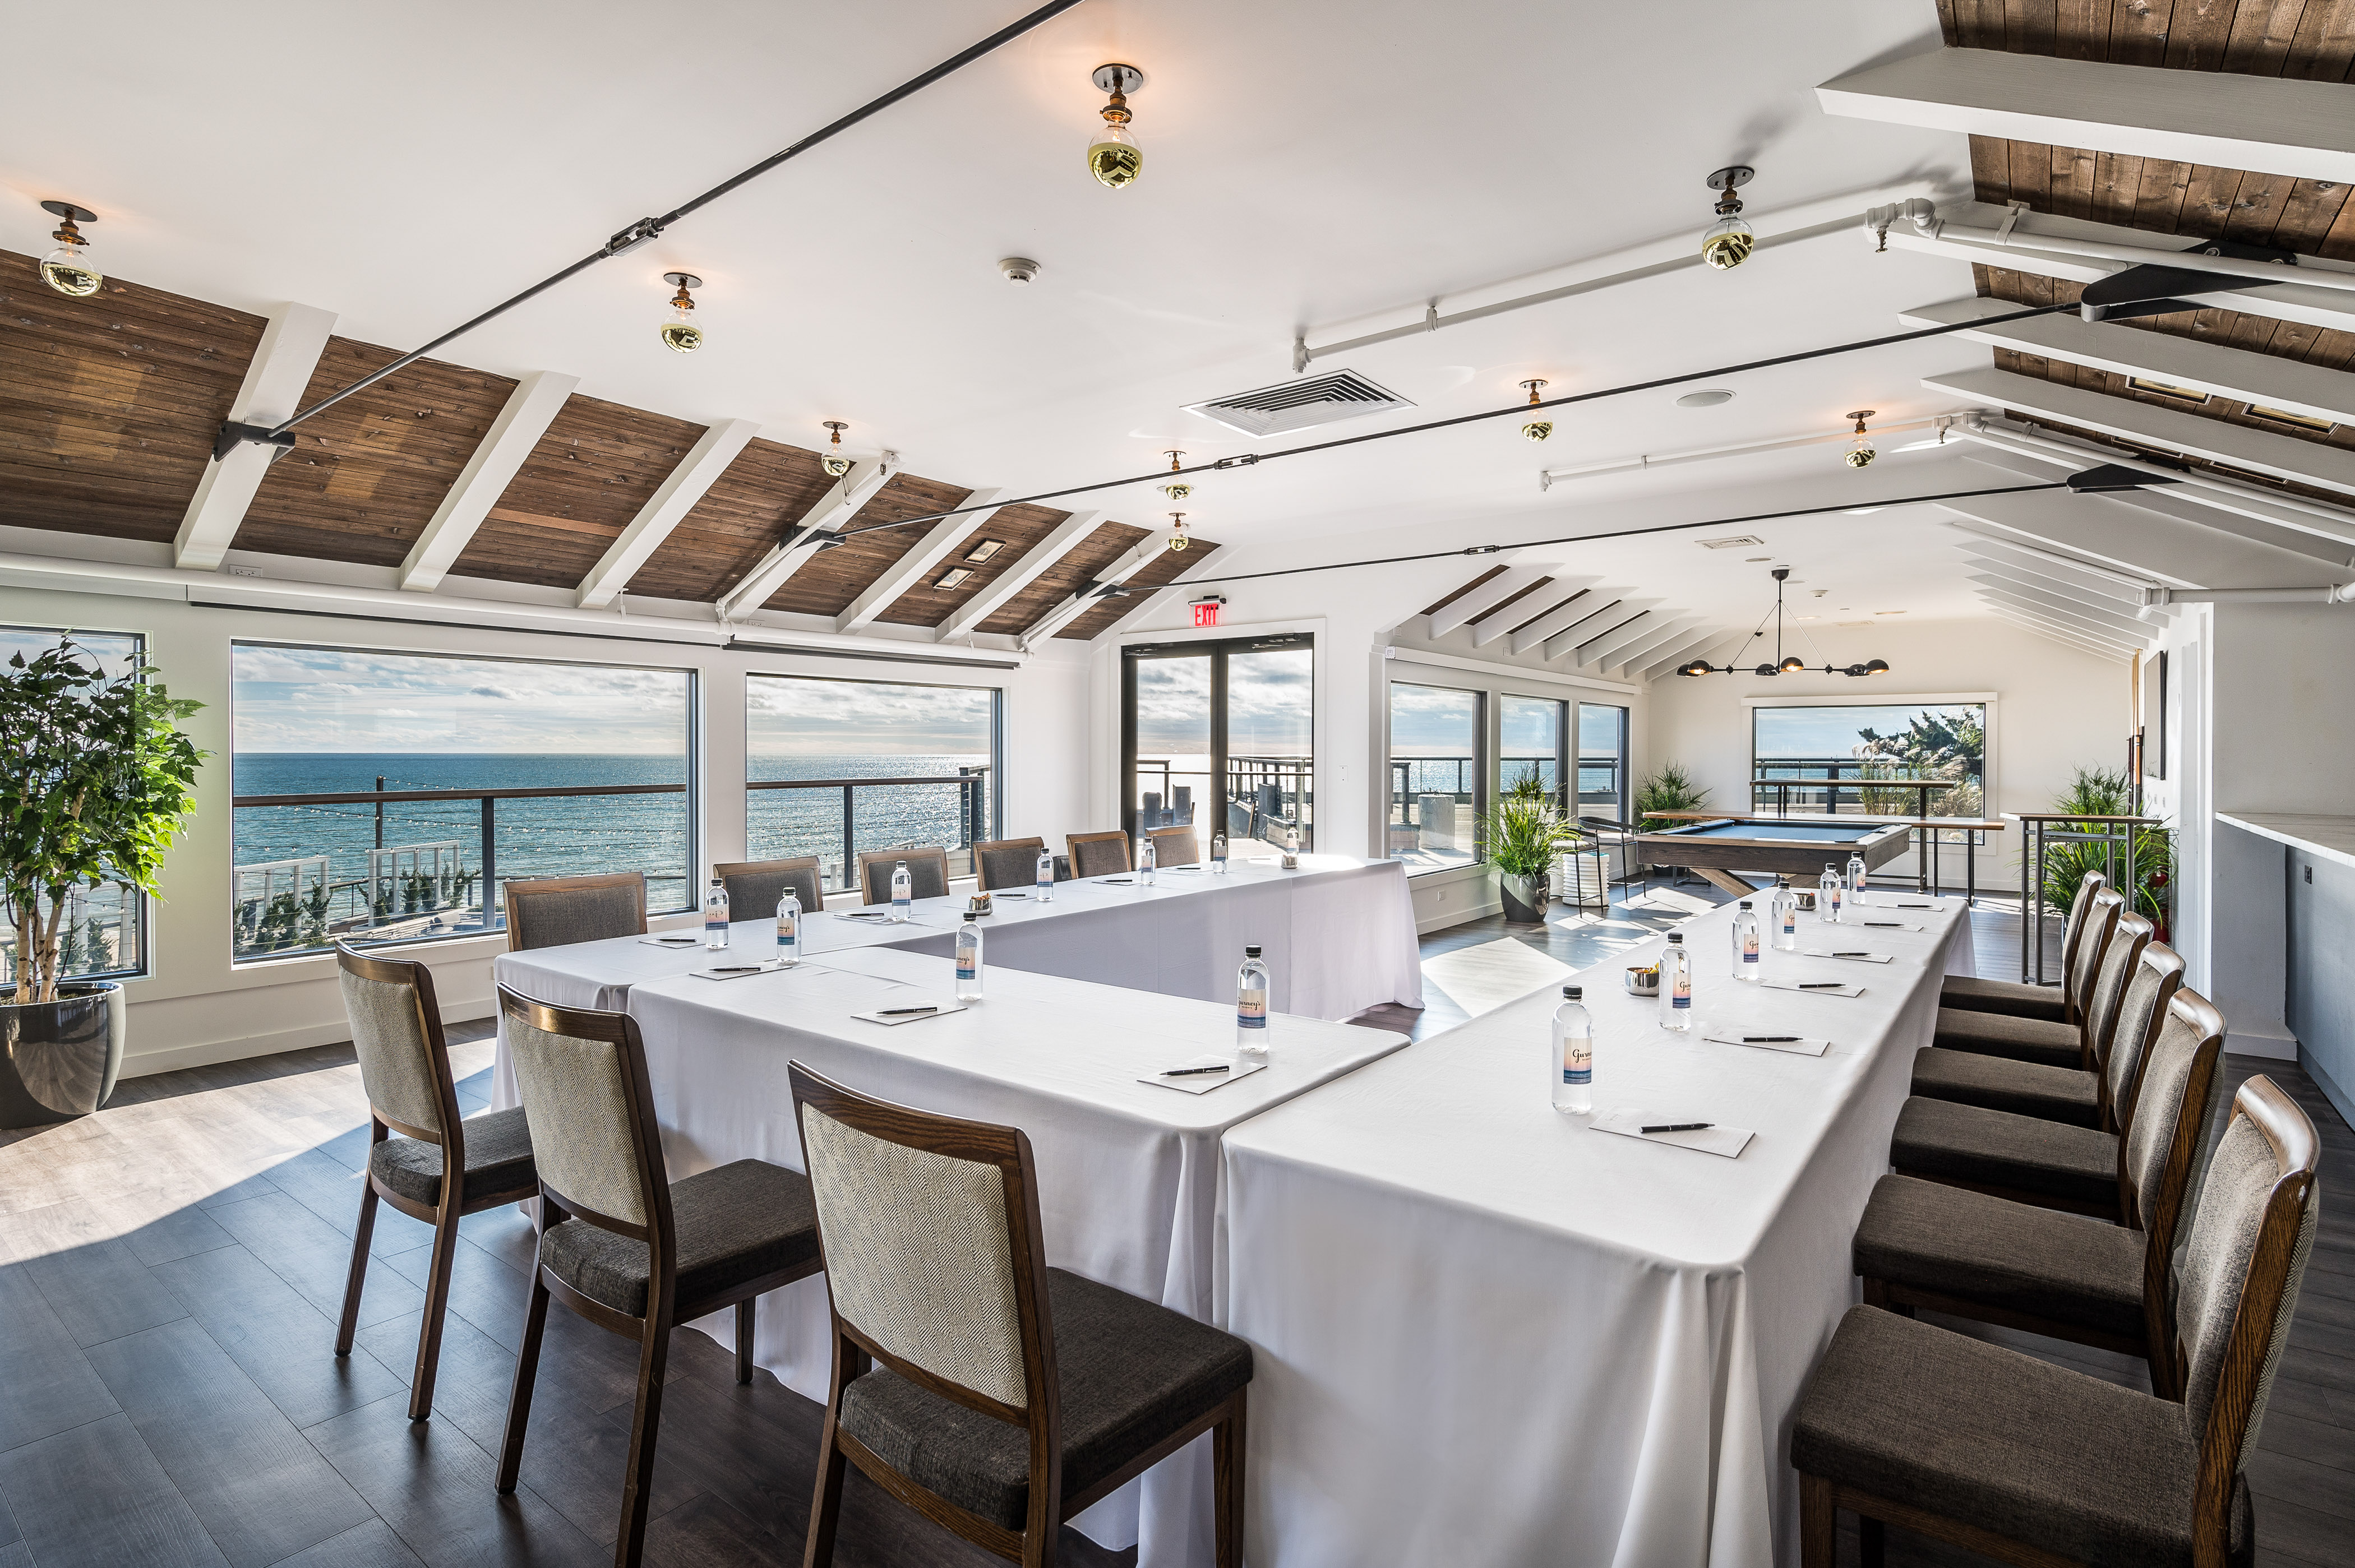 Regent Lounge with wood flooring, white walls and ceiling with wood panel accents, windows with ocean view and u-shaped table setup with white linen and wooden chairs.